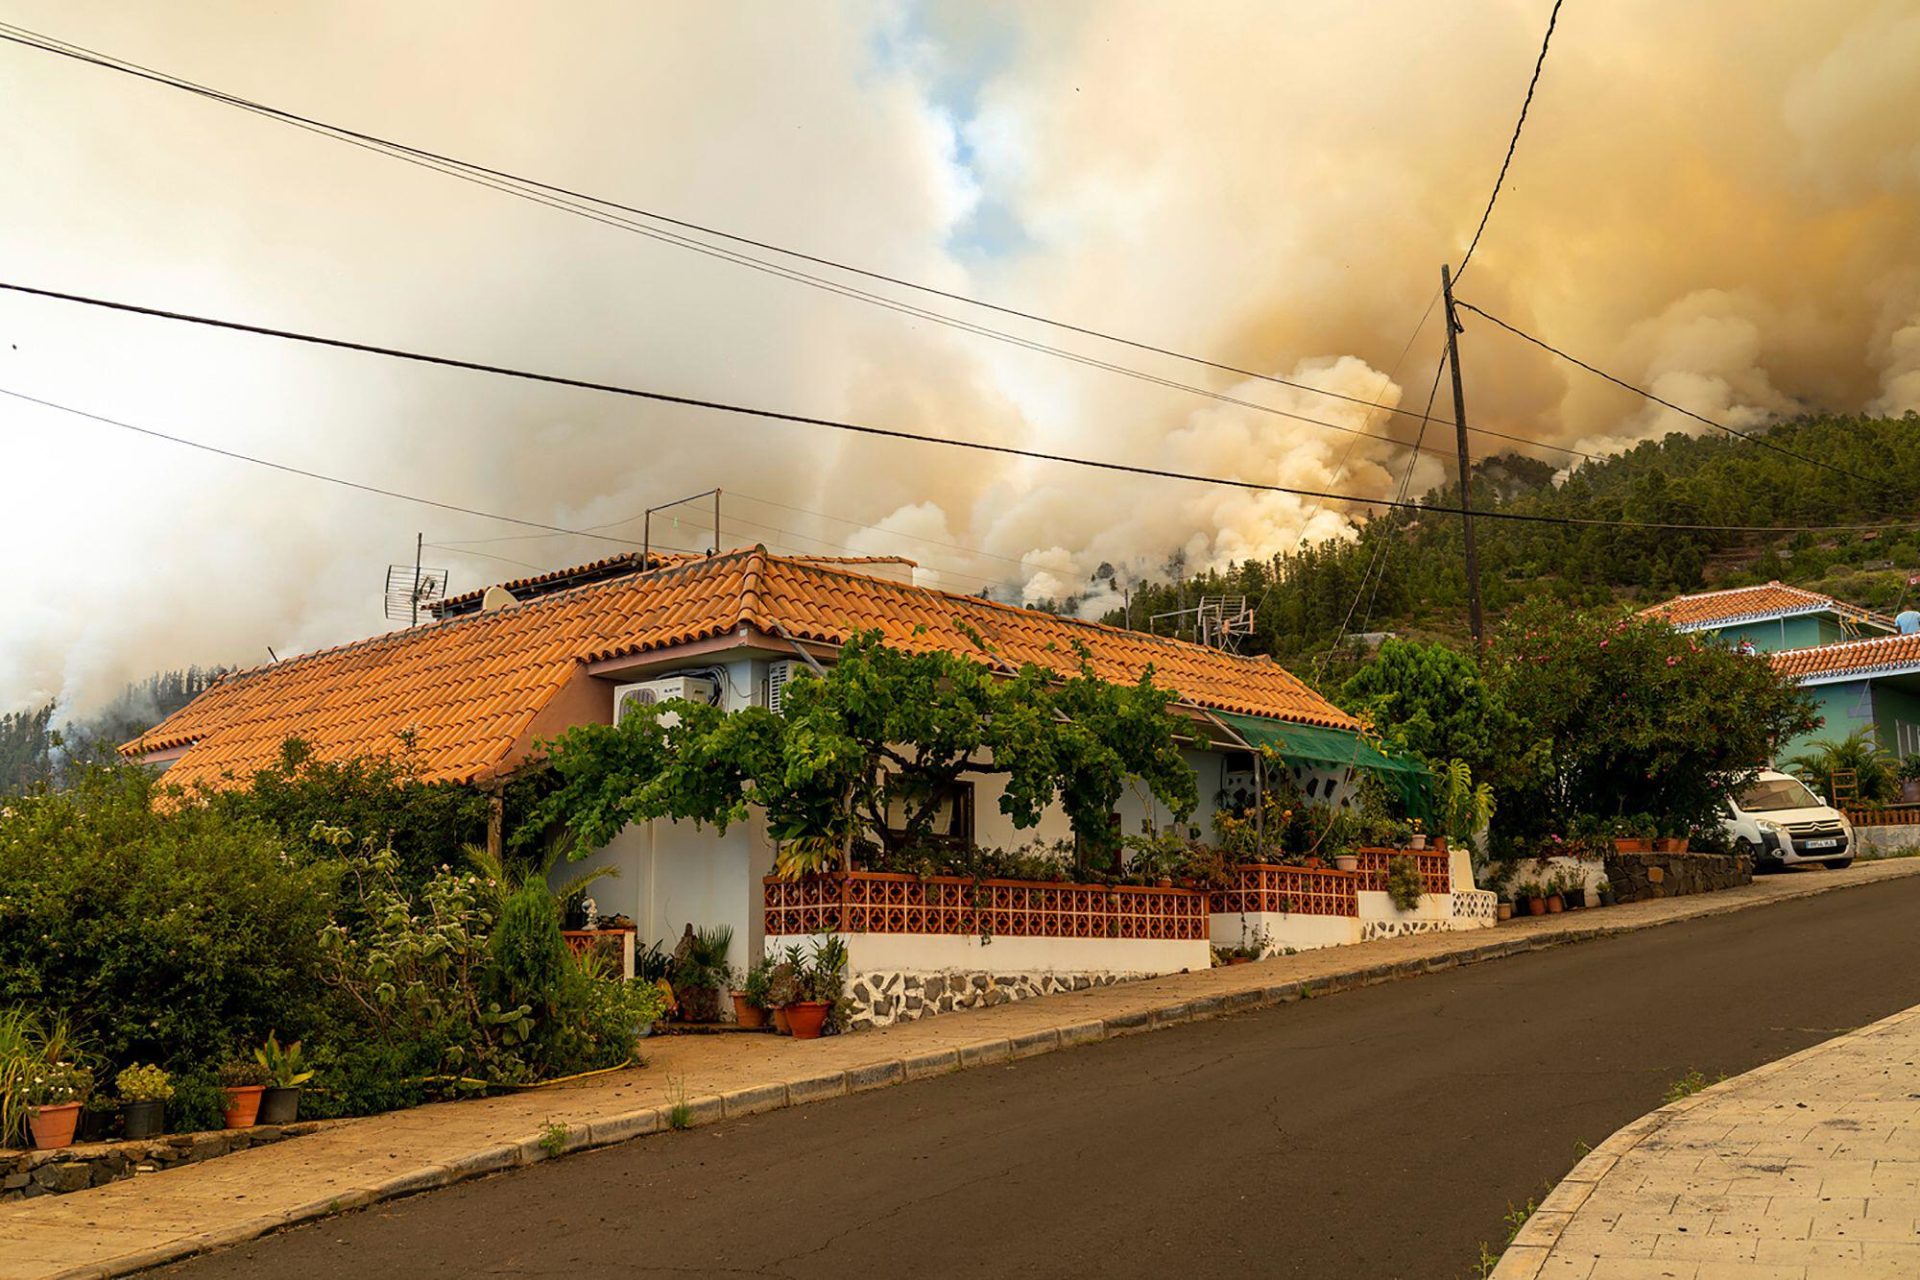 View of the fire approaching an evacuated population centre in Puntagorda, La Palma, Canary Islands in Spain